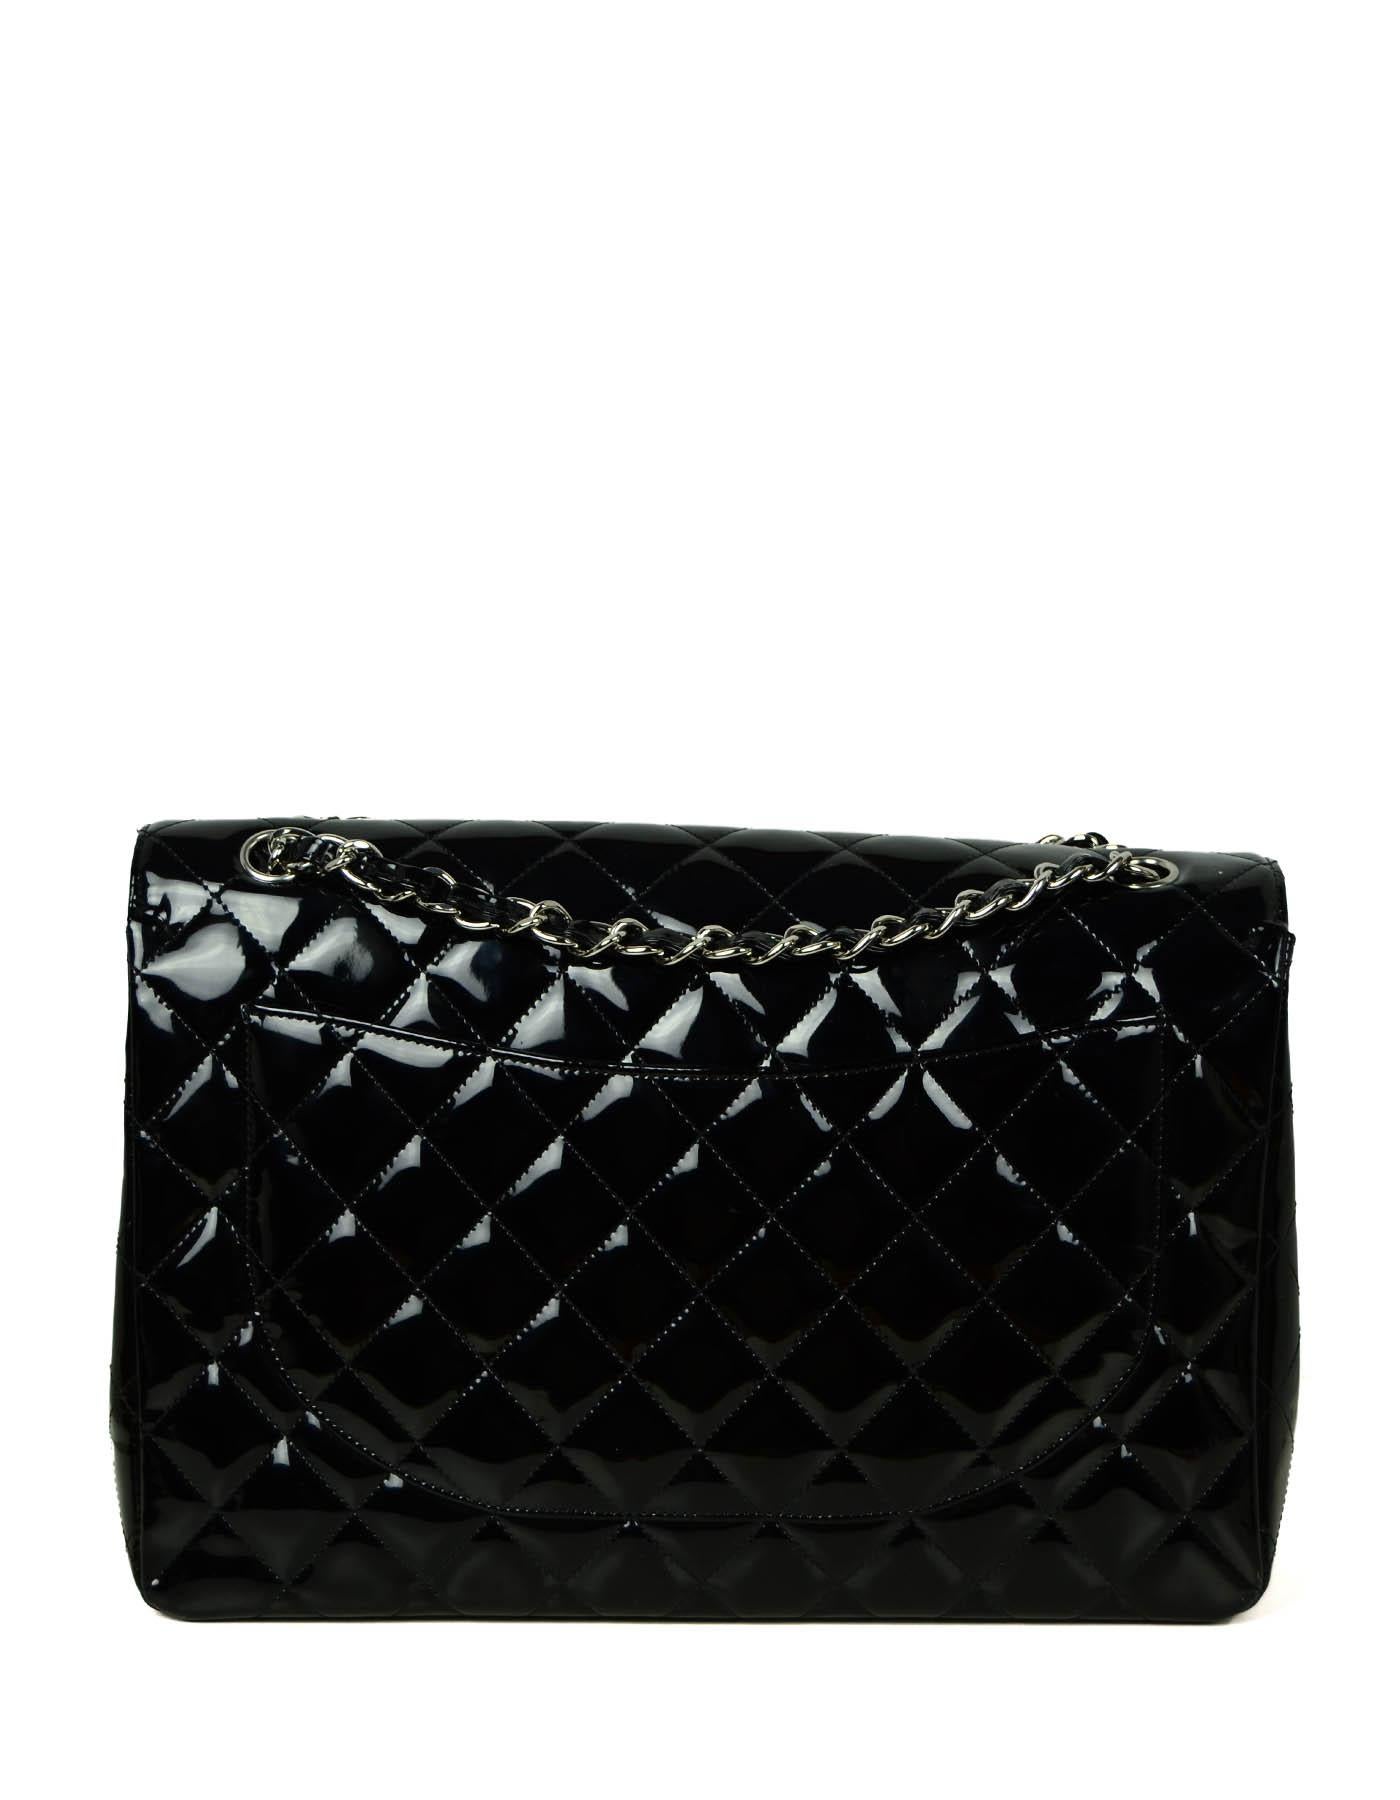 Women's Chanel Black Patent Leather Quilted Single Flap Maxi Classic Bag